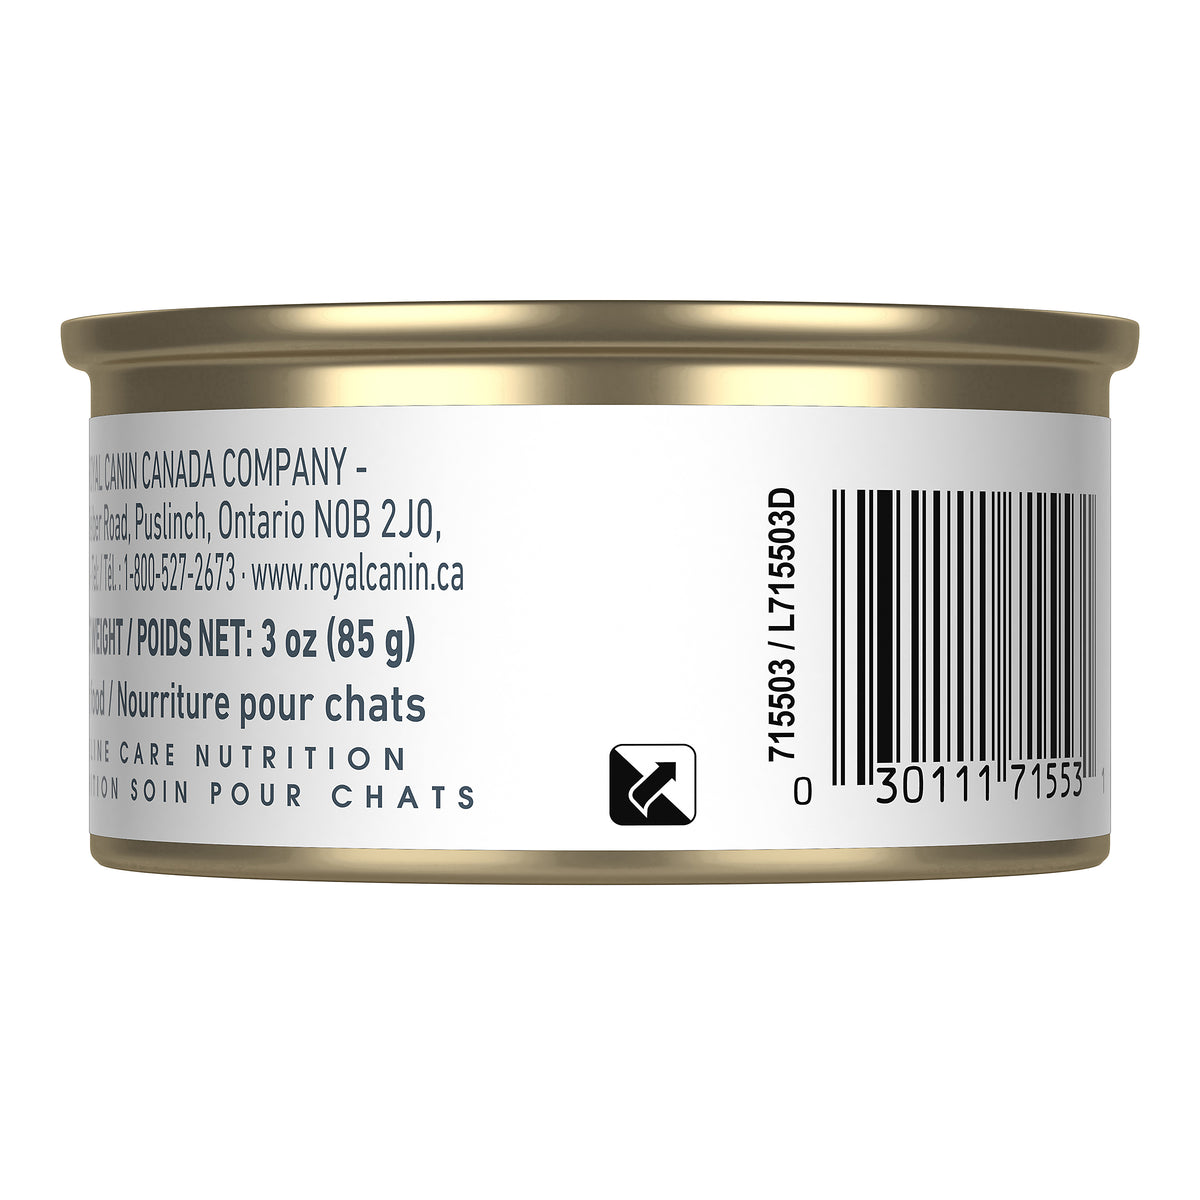 Royal Canin Digest Sensitive (Thin Slices in Gravy) - Wet Canned cat food